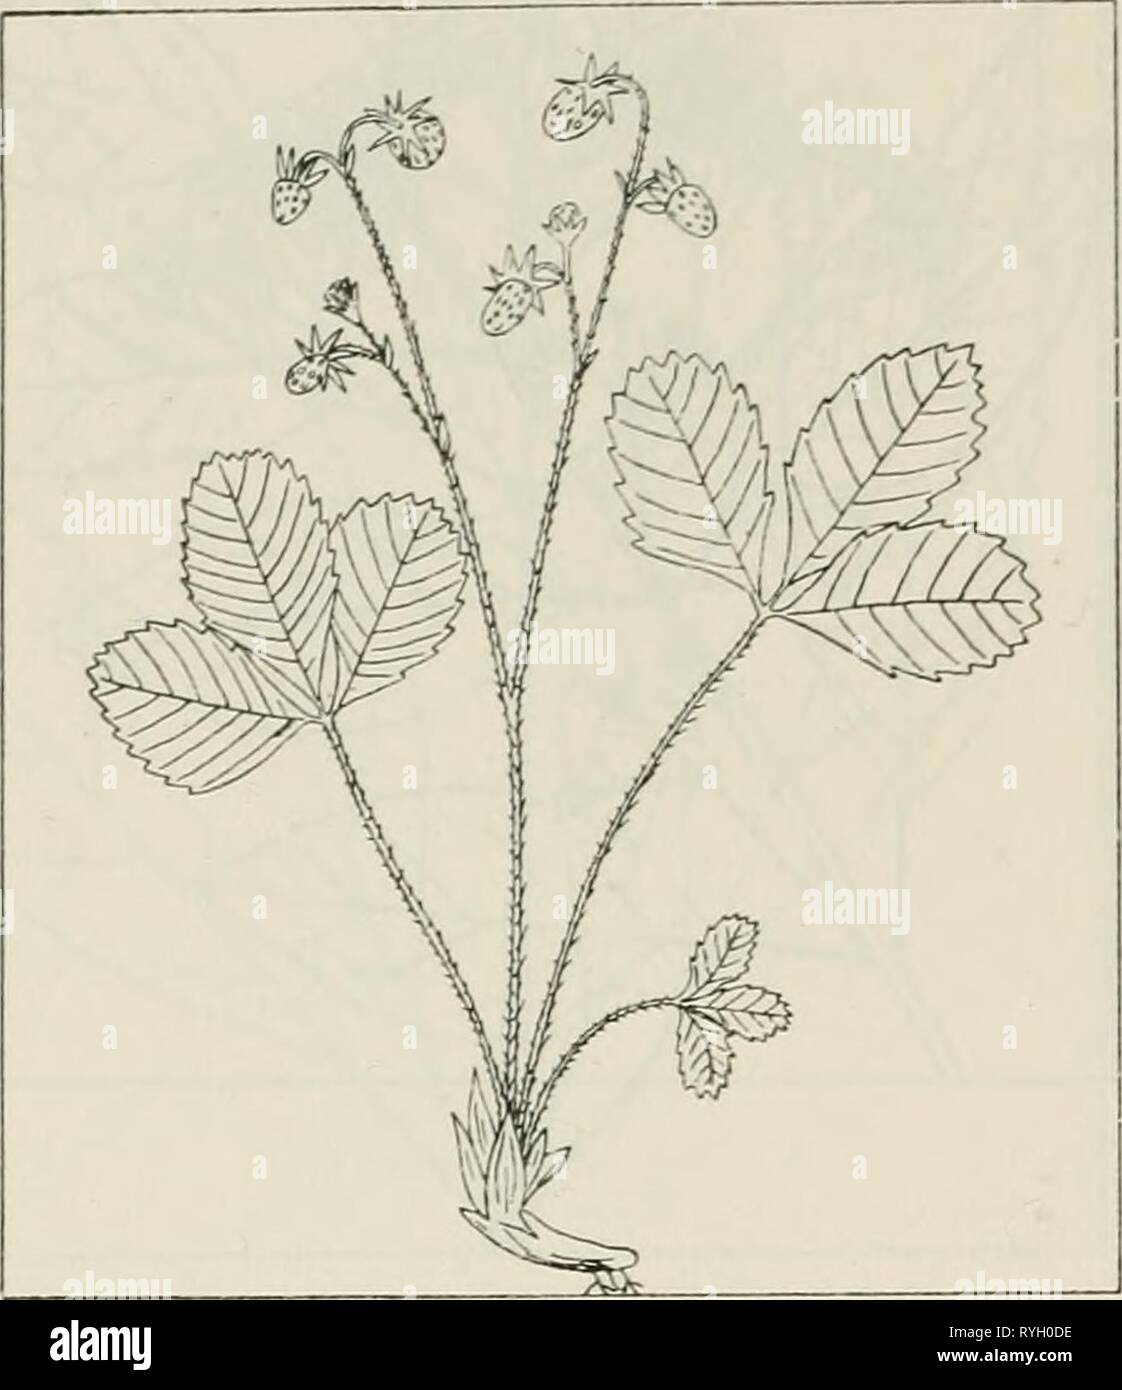 The drug plants of Illinois  drugplantsofilli44teho Year: 1951  56 ILLINOIS NATURAL HISTORY SURVEY Circular 44    FRAGARIA VESGA L. Strawberry. Alpine strawberry. Rosaceae. The leaves collected, also the fruit. Cultivated in home and farm gardens throughout the state and locally in many places in fields of some size; persists after being planted but does not become estab- lished. The fruit contains salicylic acid and malic acid. Said to have astringent and diuretic properties but is valuable chiefly for the fruit syrup which is used as a pleasant ve- hicle for medicines.  Fragaria 'virginiana Stock Photo